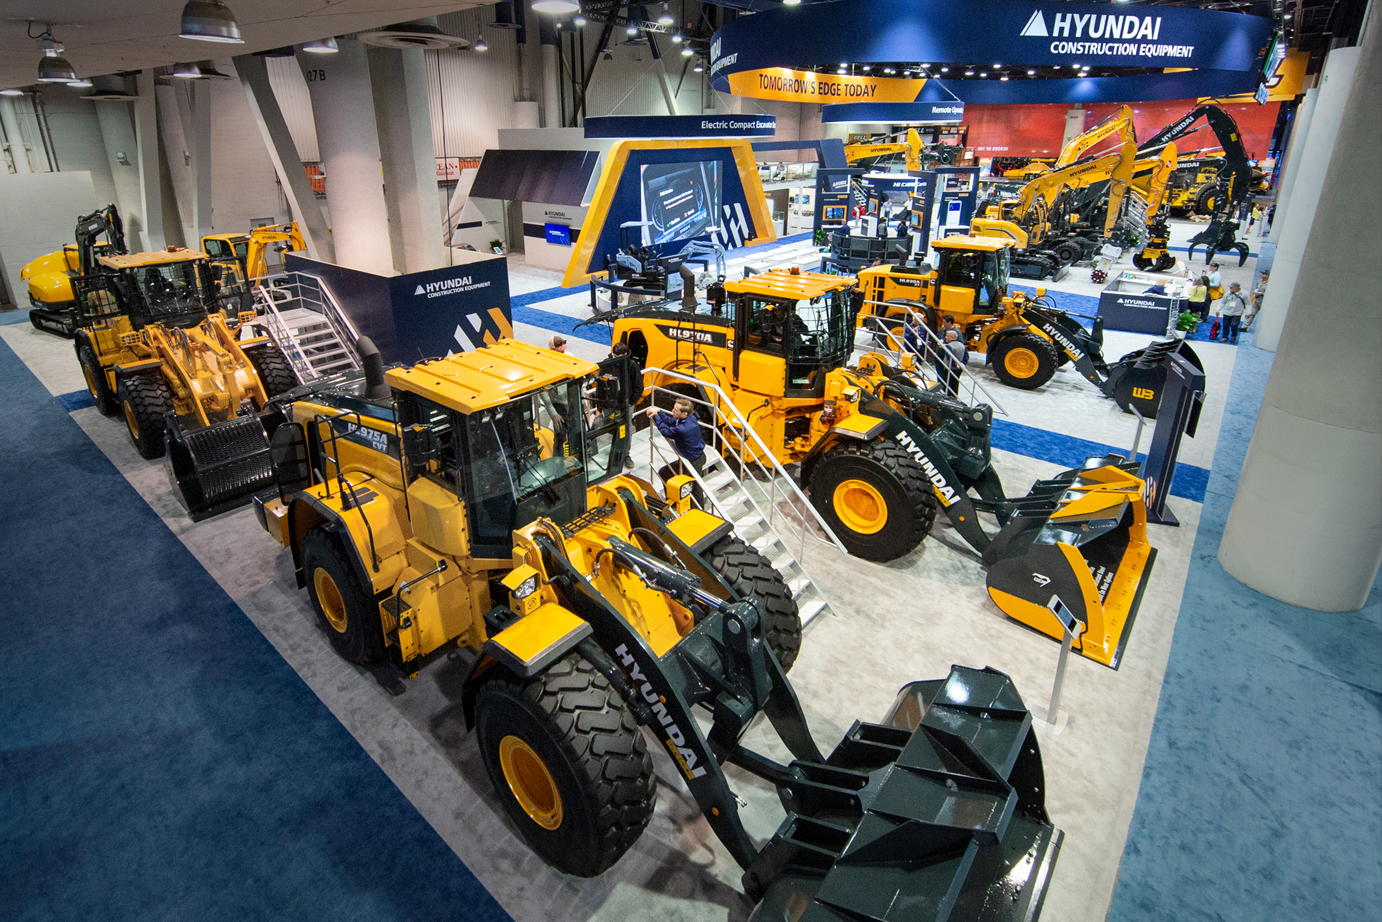 Hyundai CONEXPO-CON/AGG 2020 Overview – New A Series Models, Technology Services, Electric Excavators